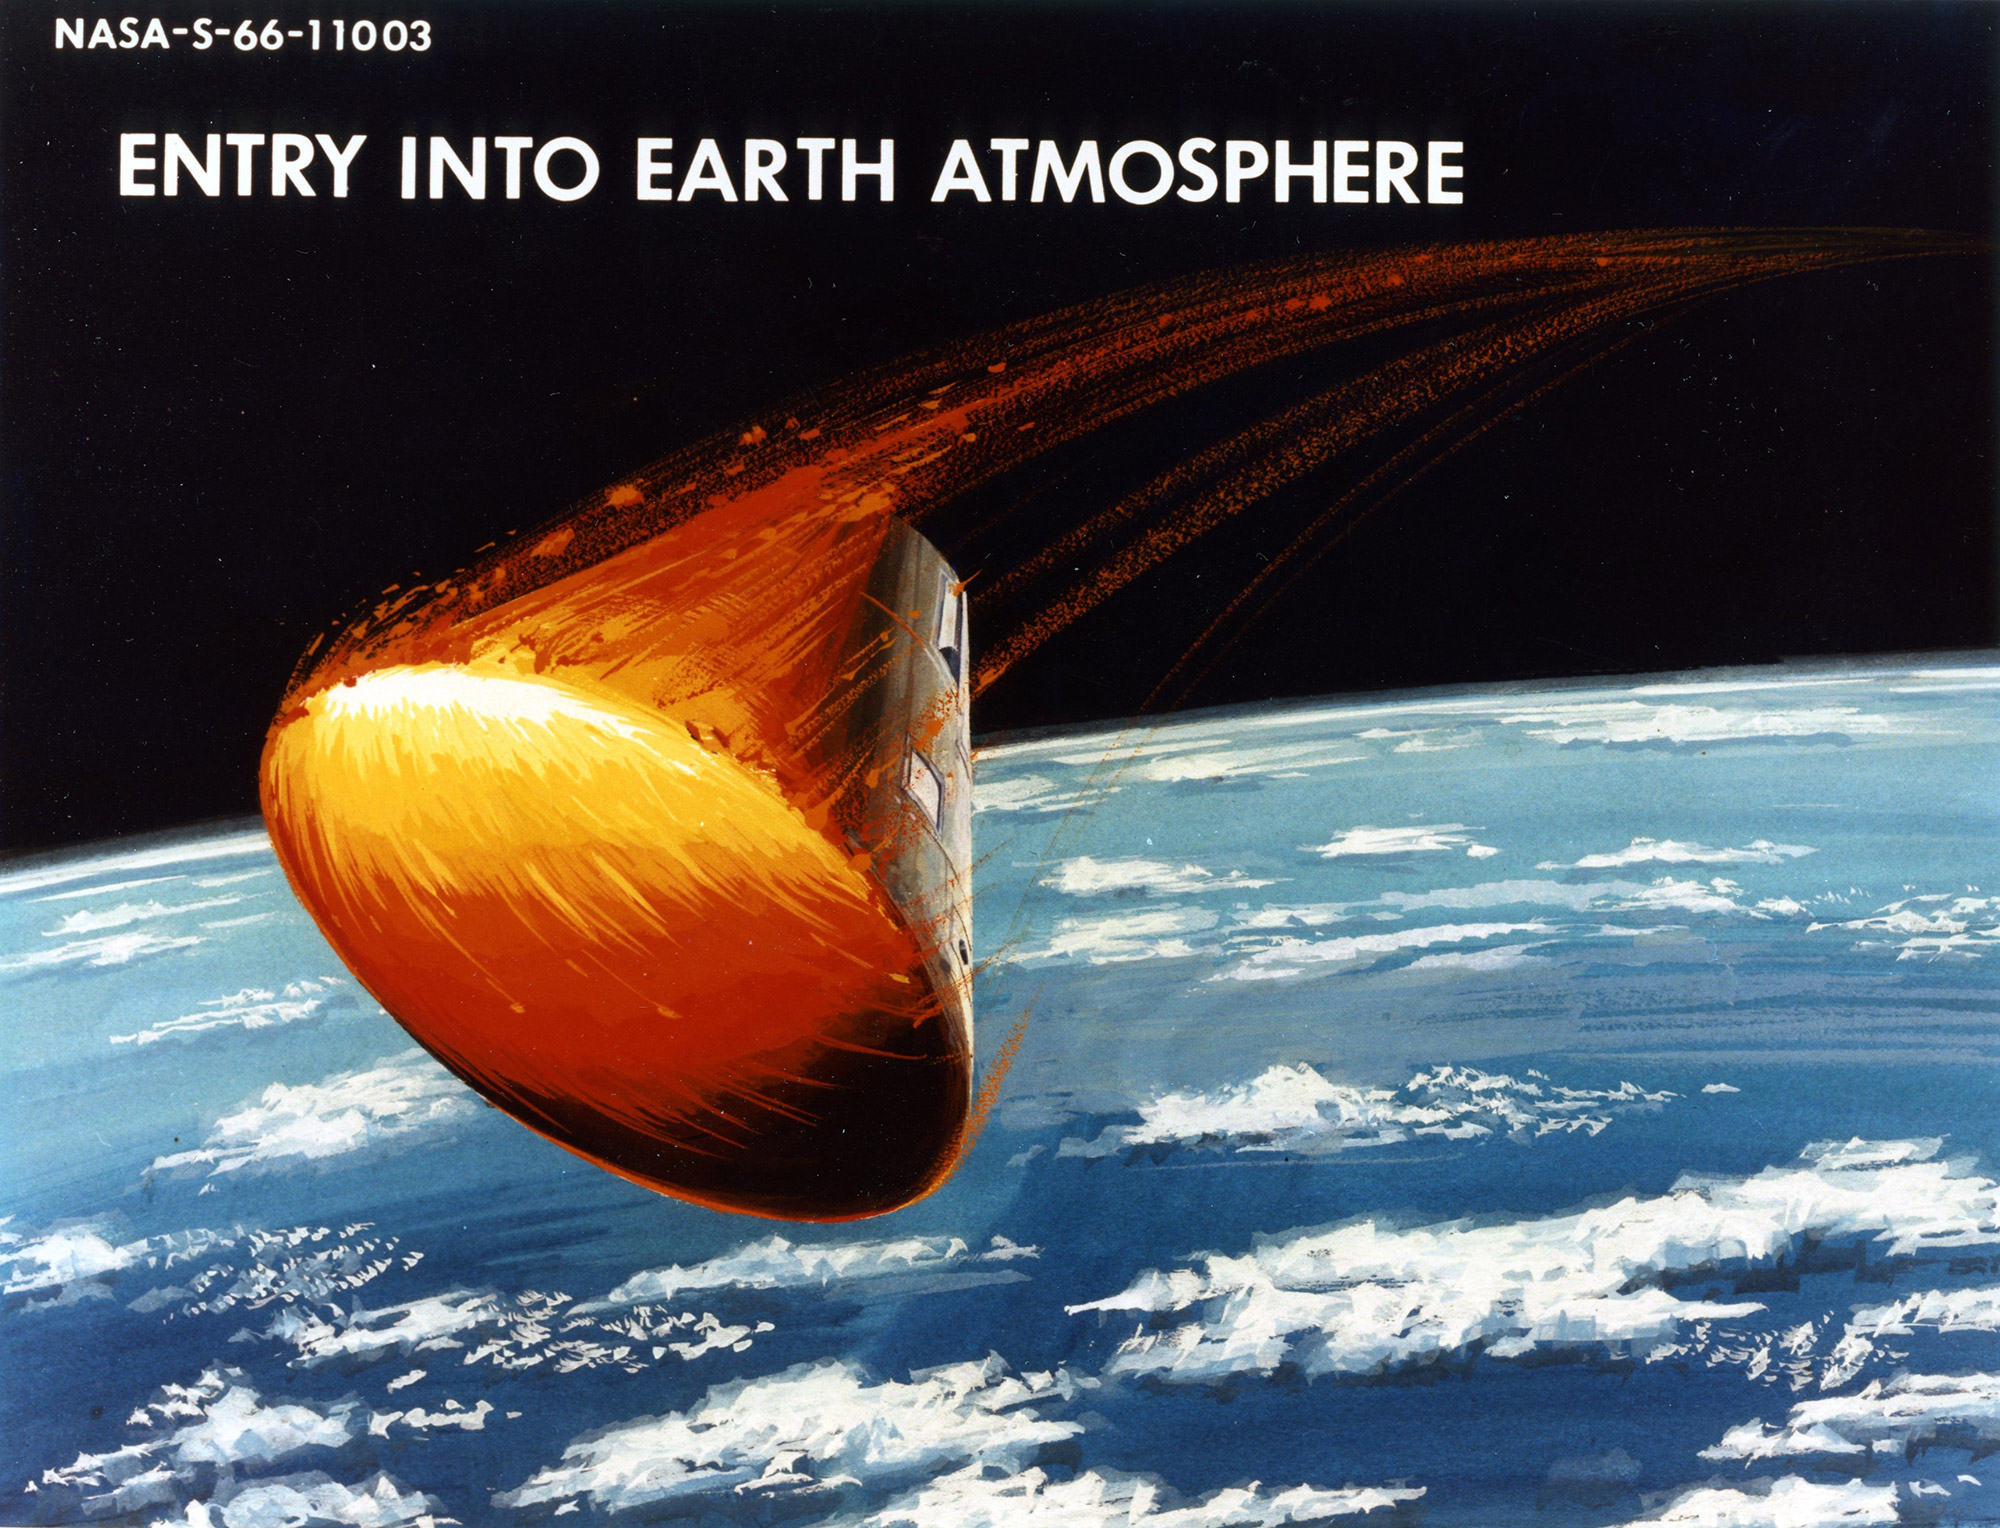 Artist’s rendering of an Apollo Command Module’s fiery re-entry and the eroding away its ablative heat shield. Credit: NASA via Retro Space Images